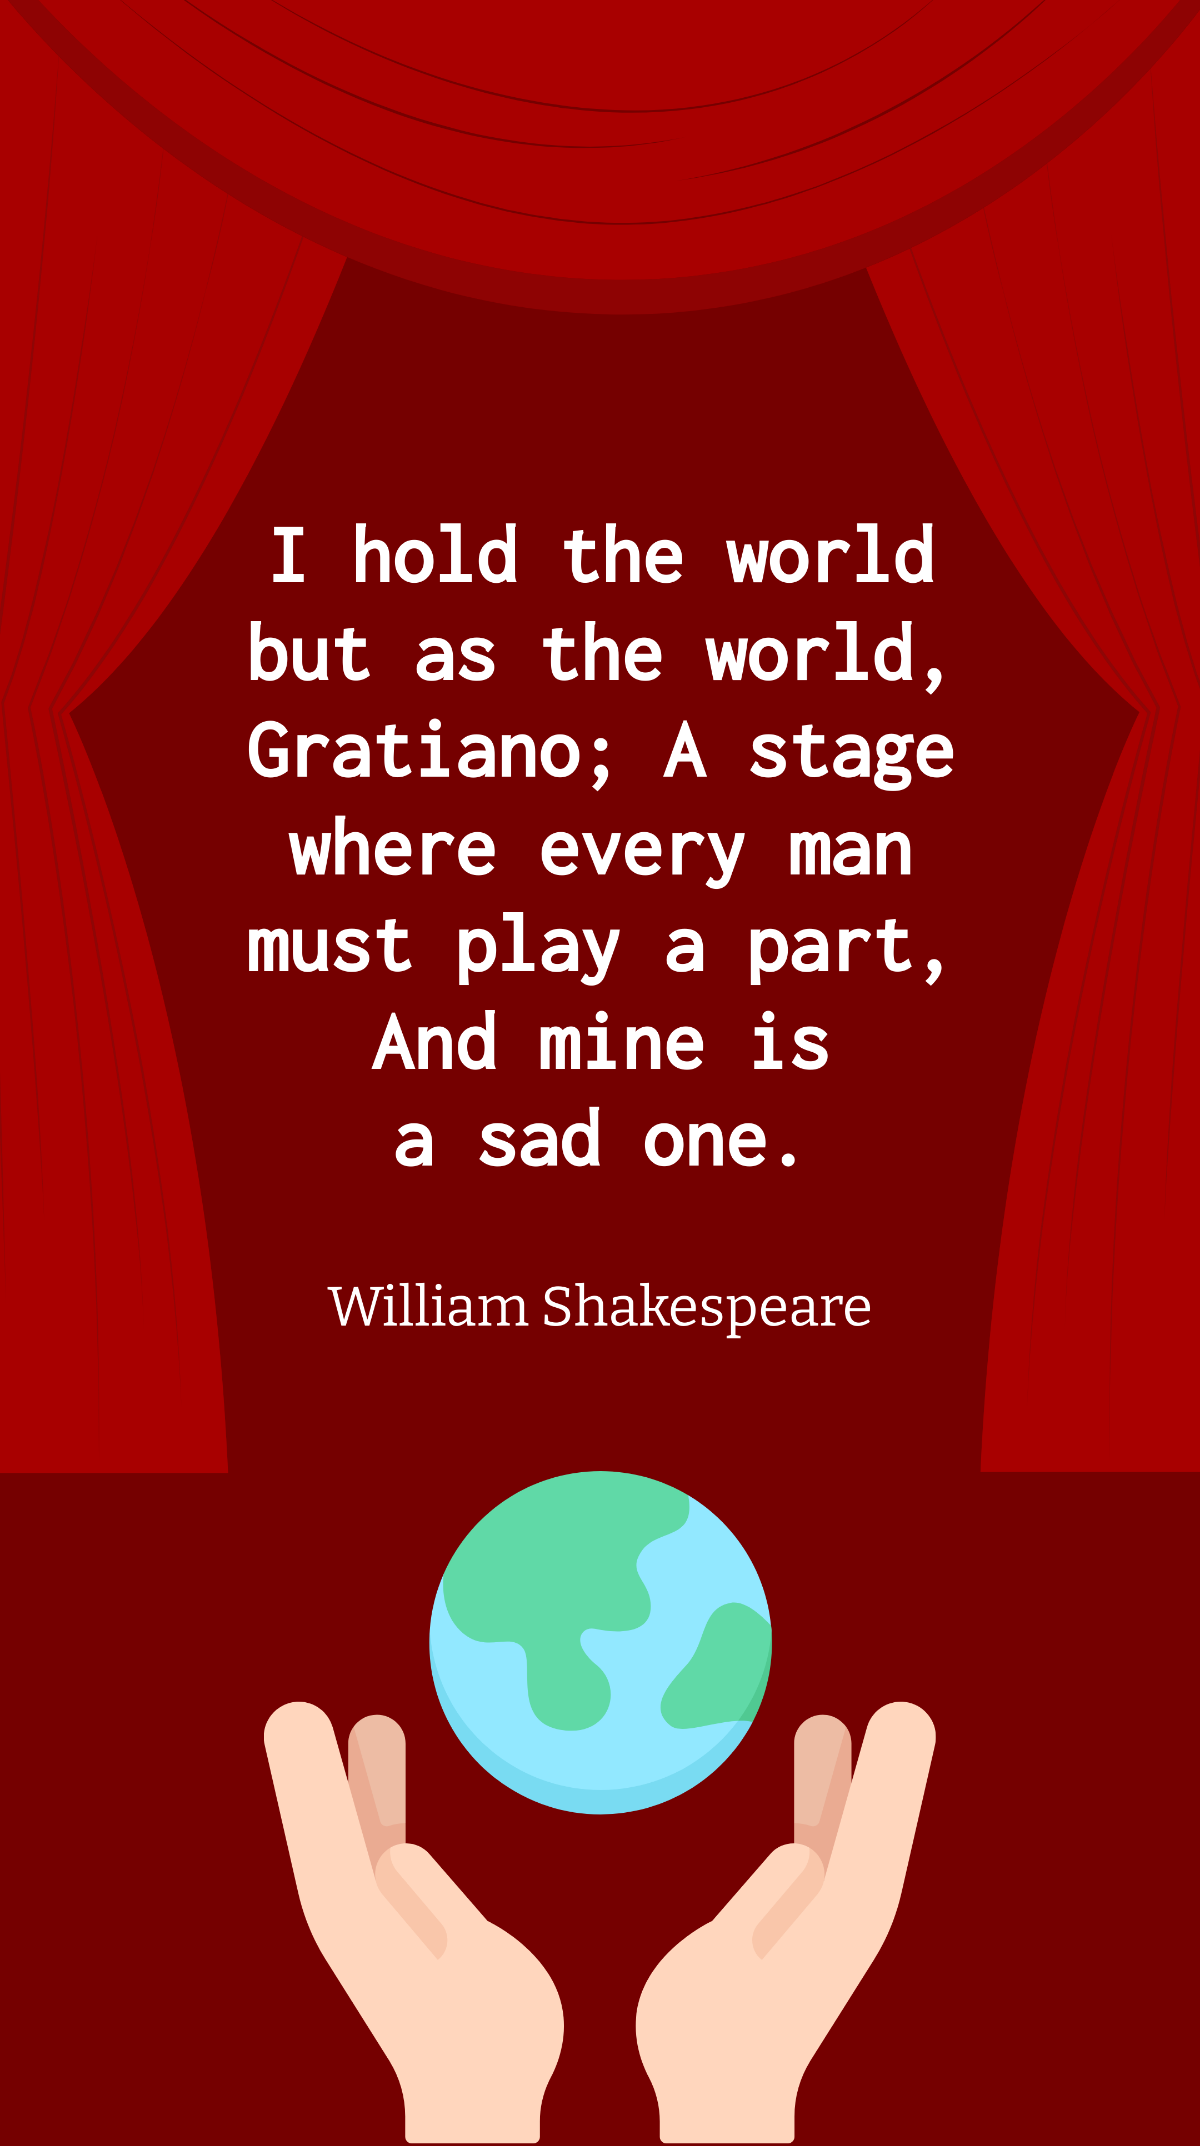 William Shakespeare - I hold the world but as the world, Gratiano; A stage where every man must play a part, And mine is a sad one. Template